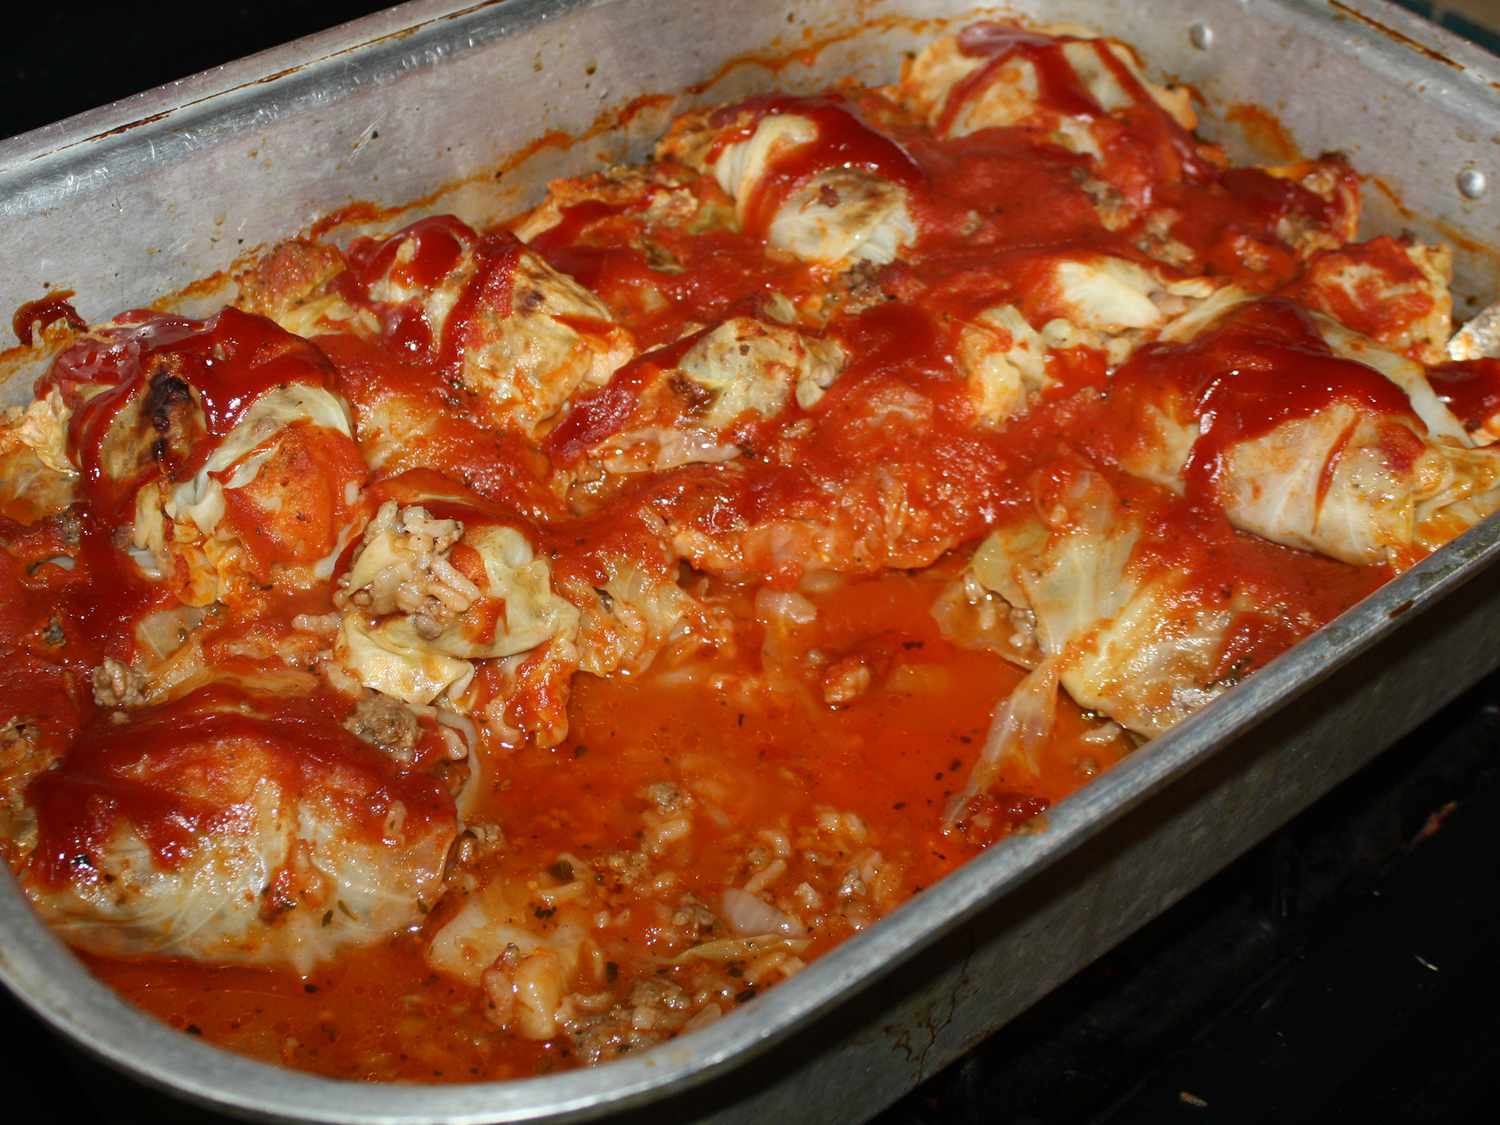 Close up view of Golabki (Stuffed Cabbage Rolls) in a baking dish on a stove